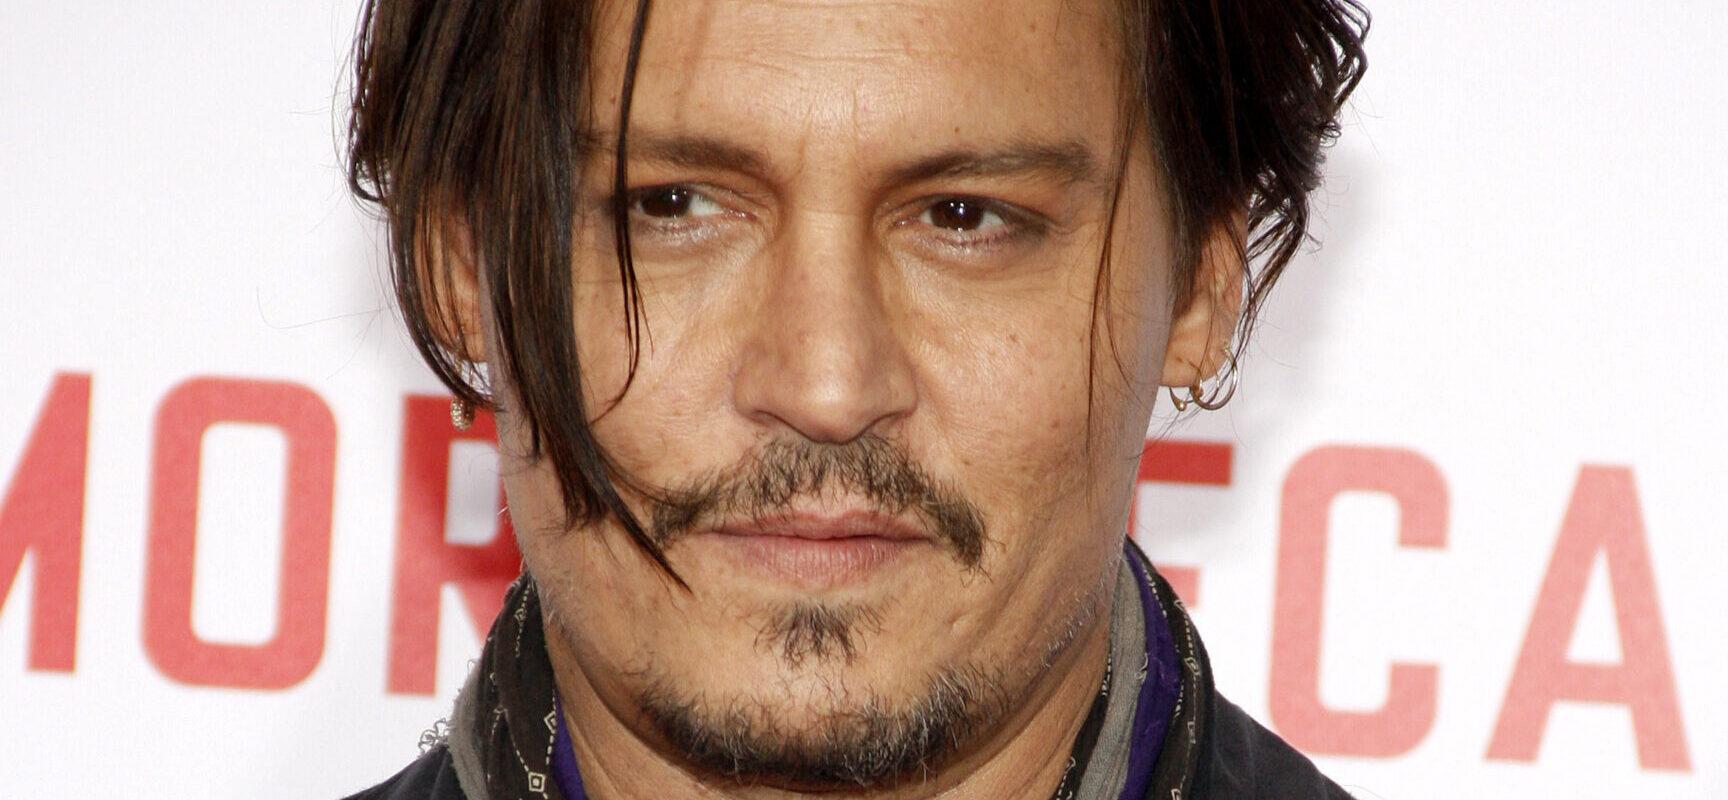 ‘Pirates Of The Caribbean’ Producer Wants Johnny Depp To Return As Captain Jack Sparrow